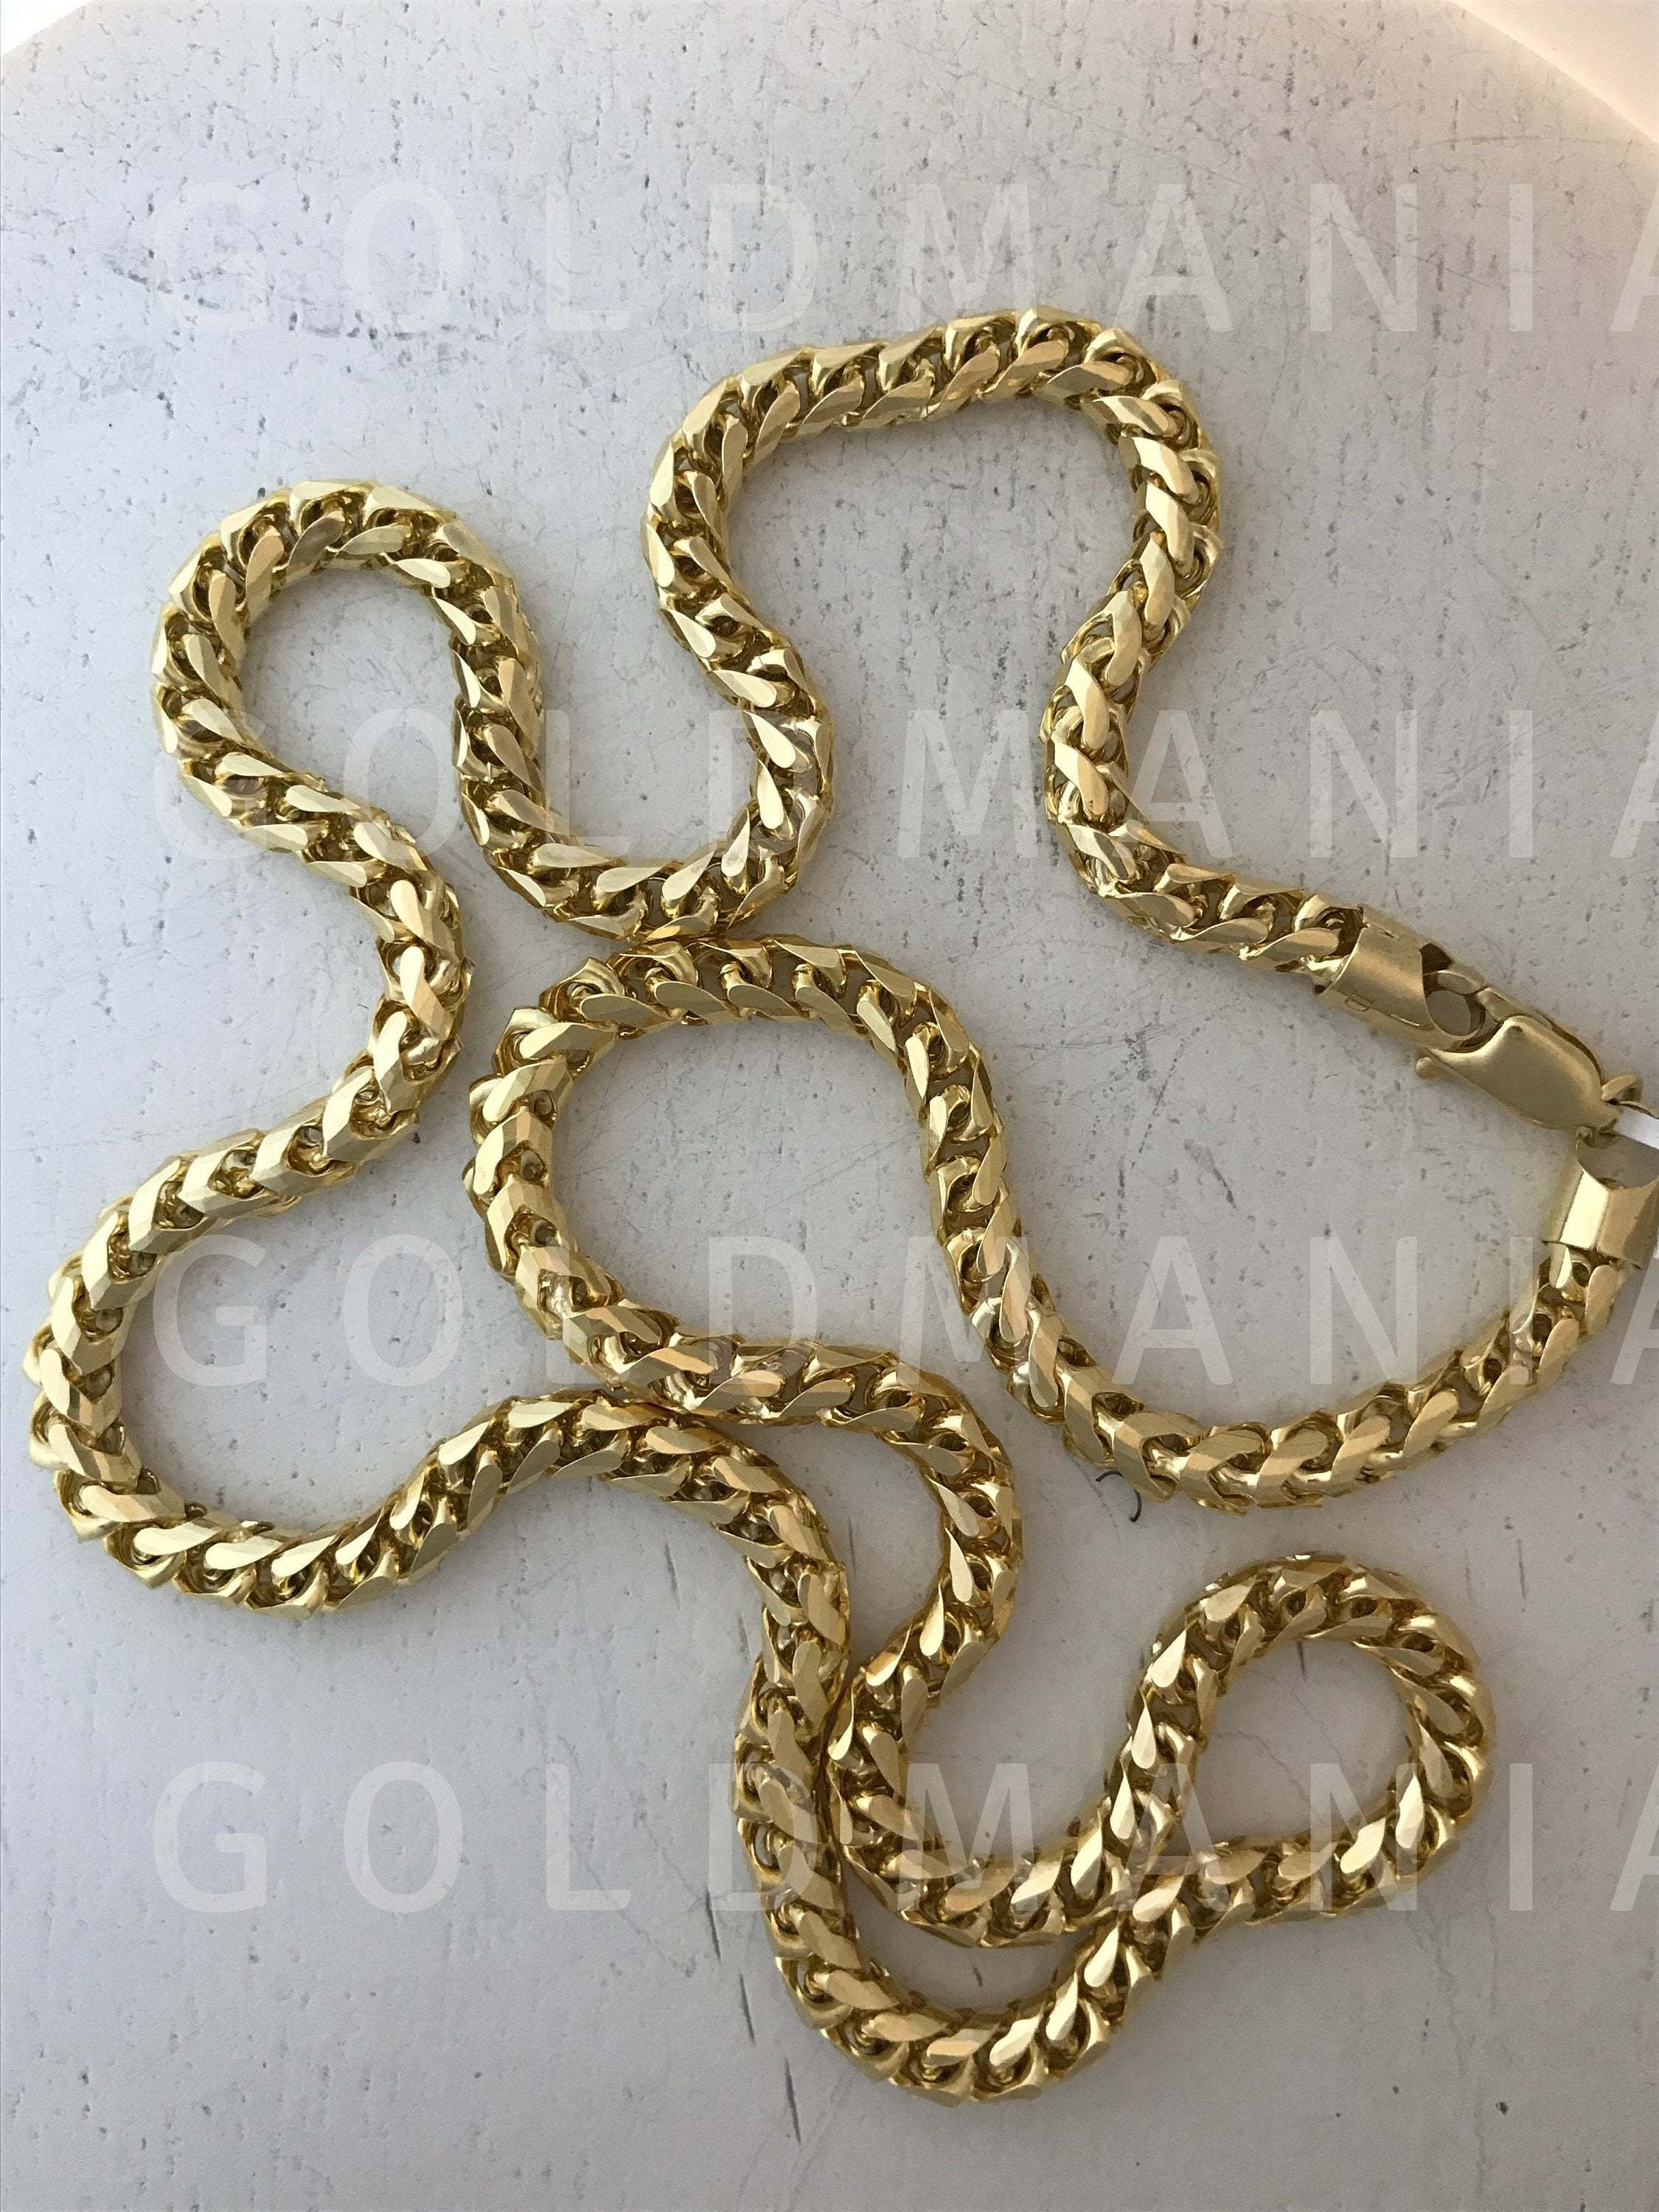 14K Gold Thin Franco Chain Necklace – David's House of Diamonds